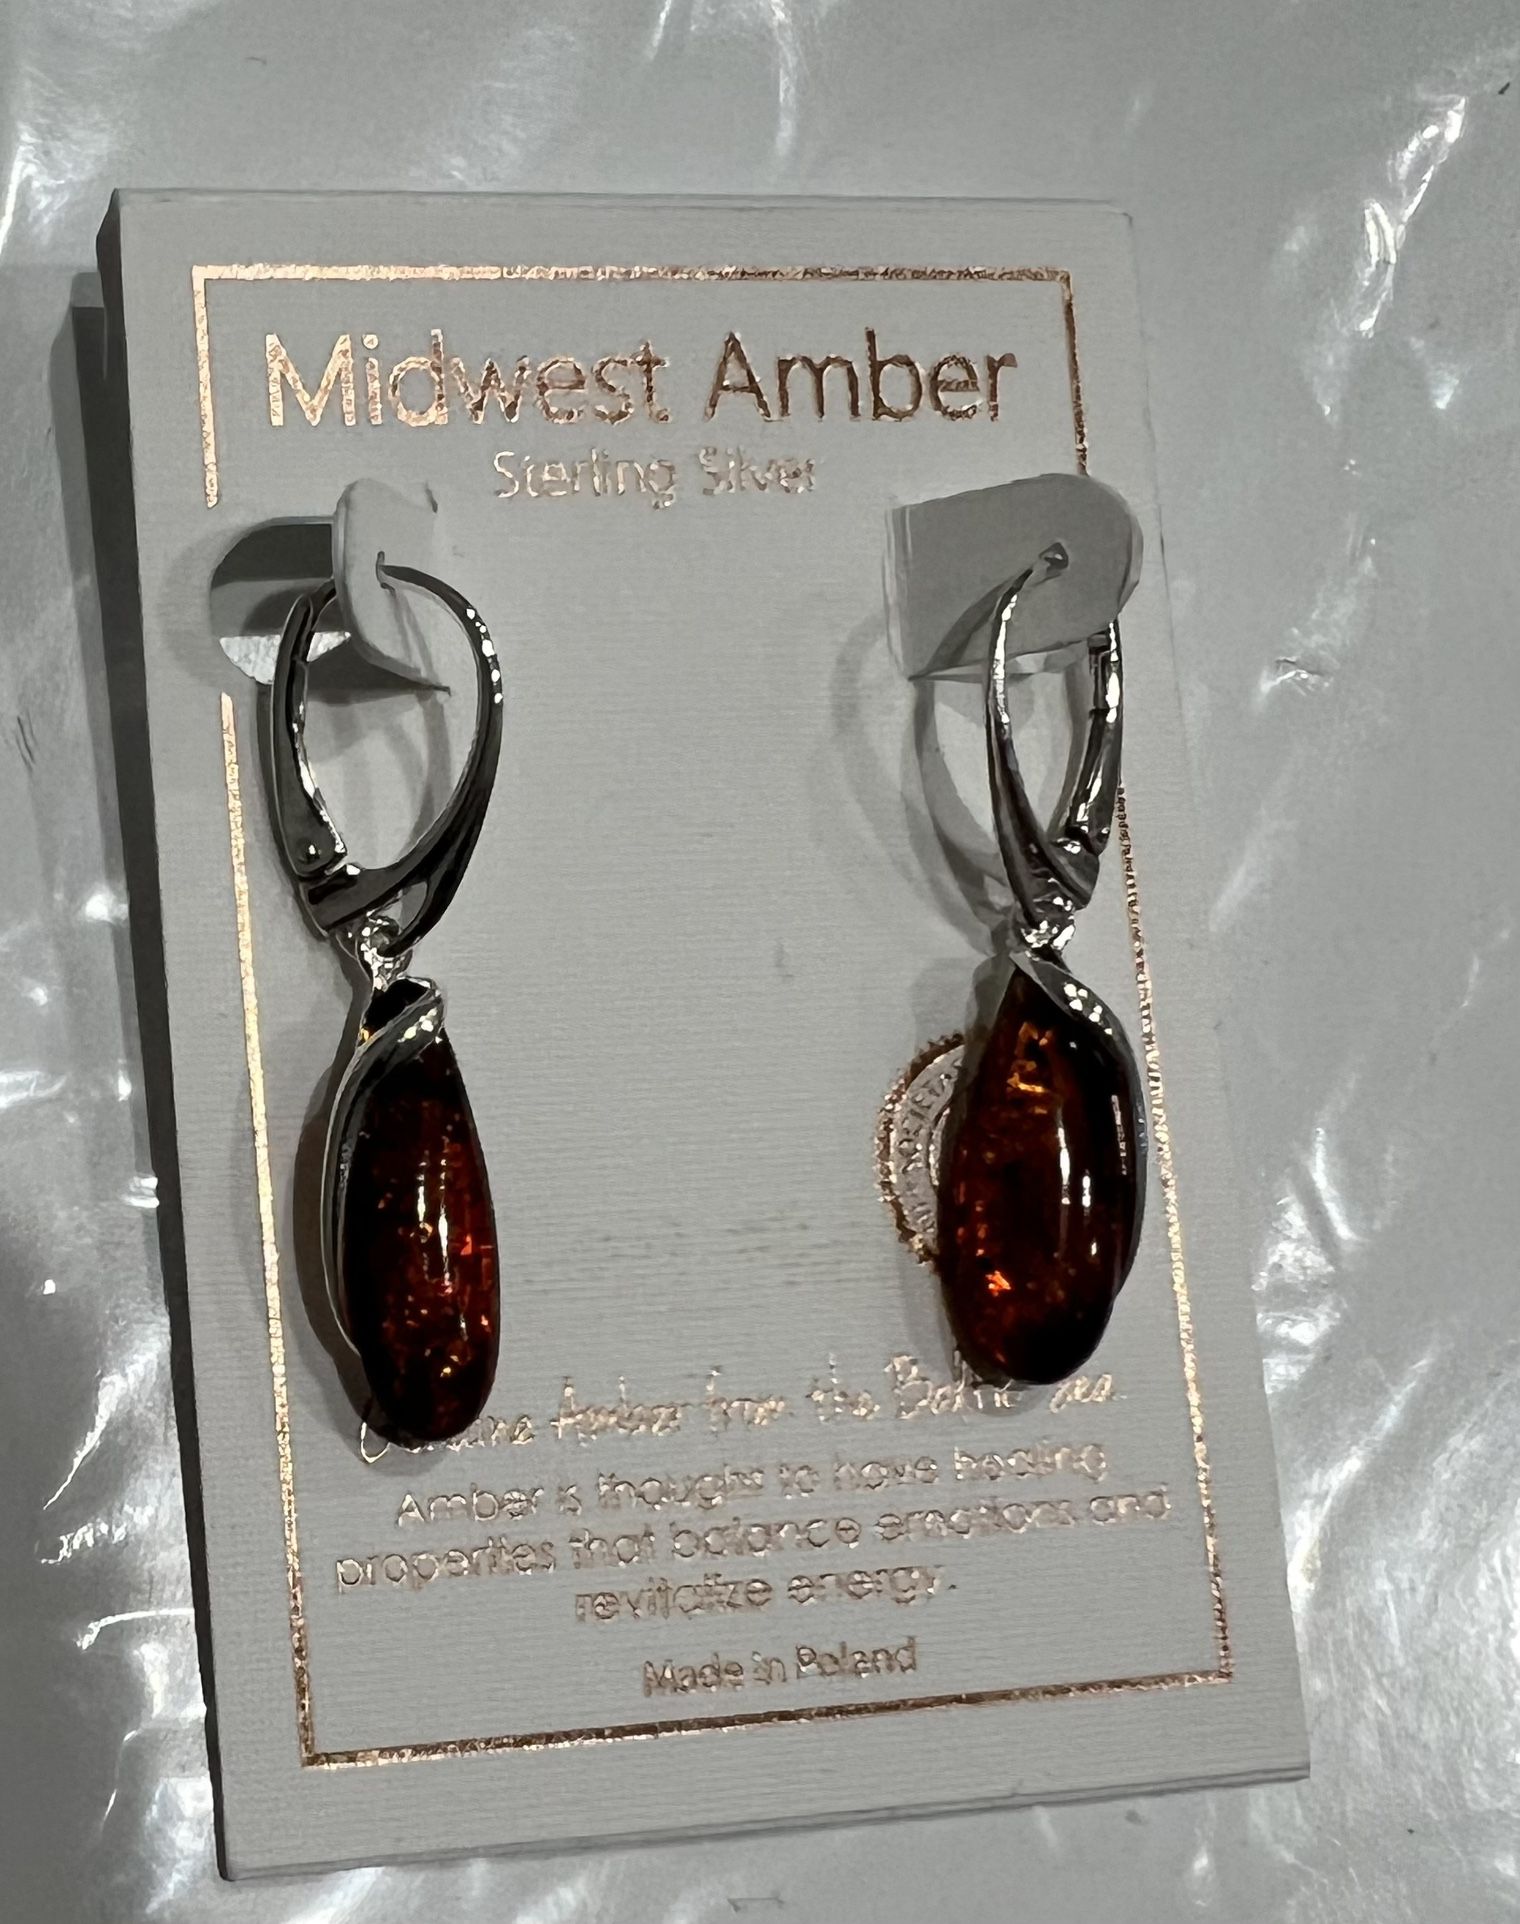 Midwest Amber sterling silver earrings 